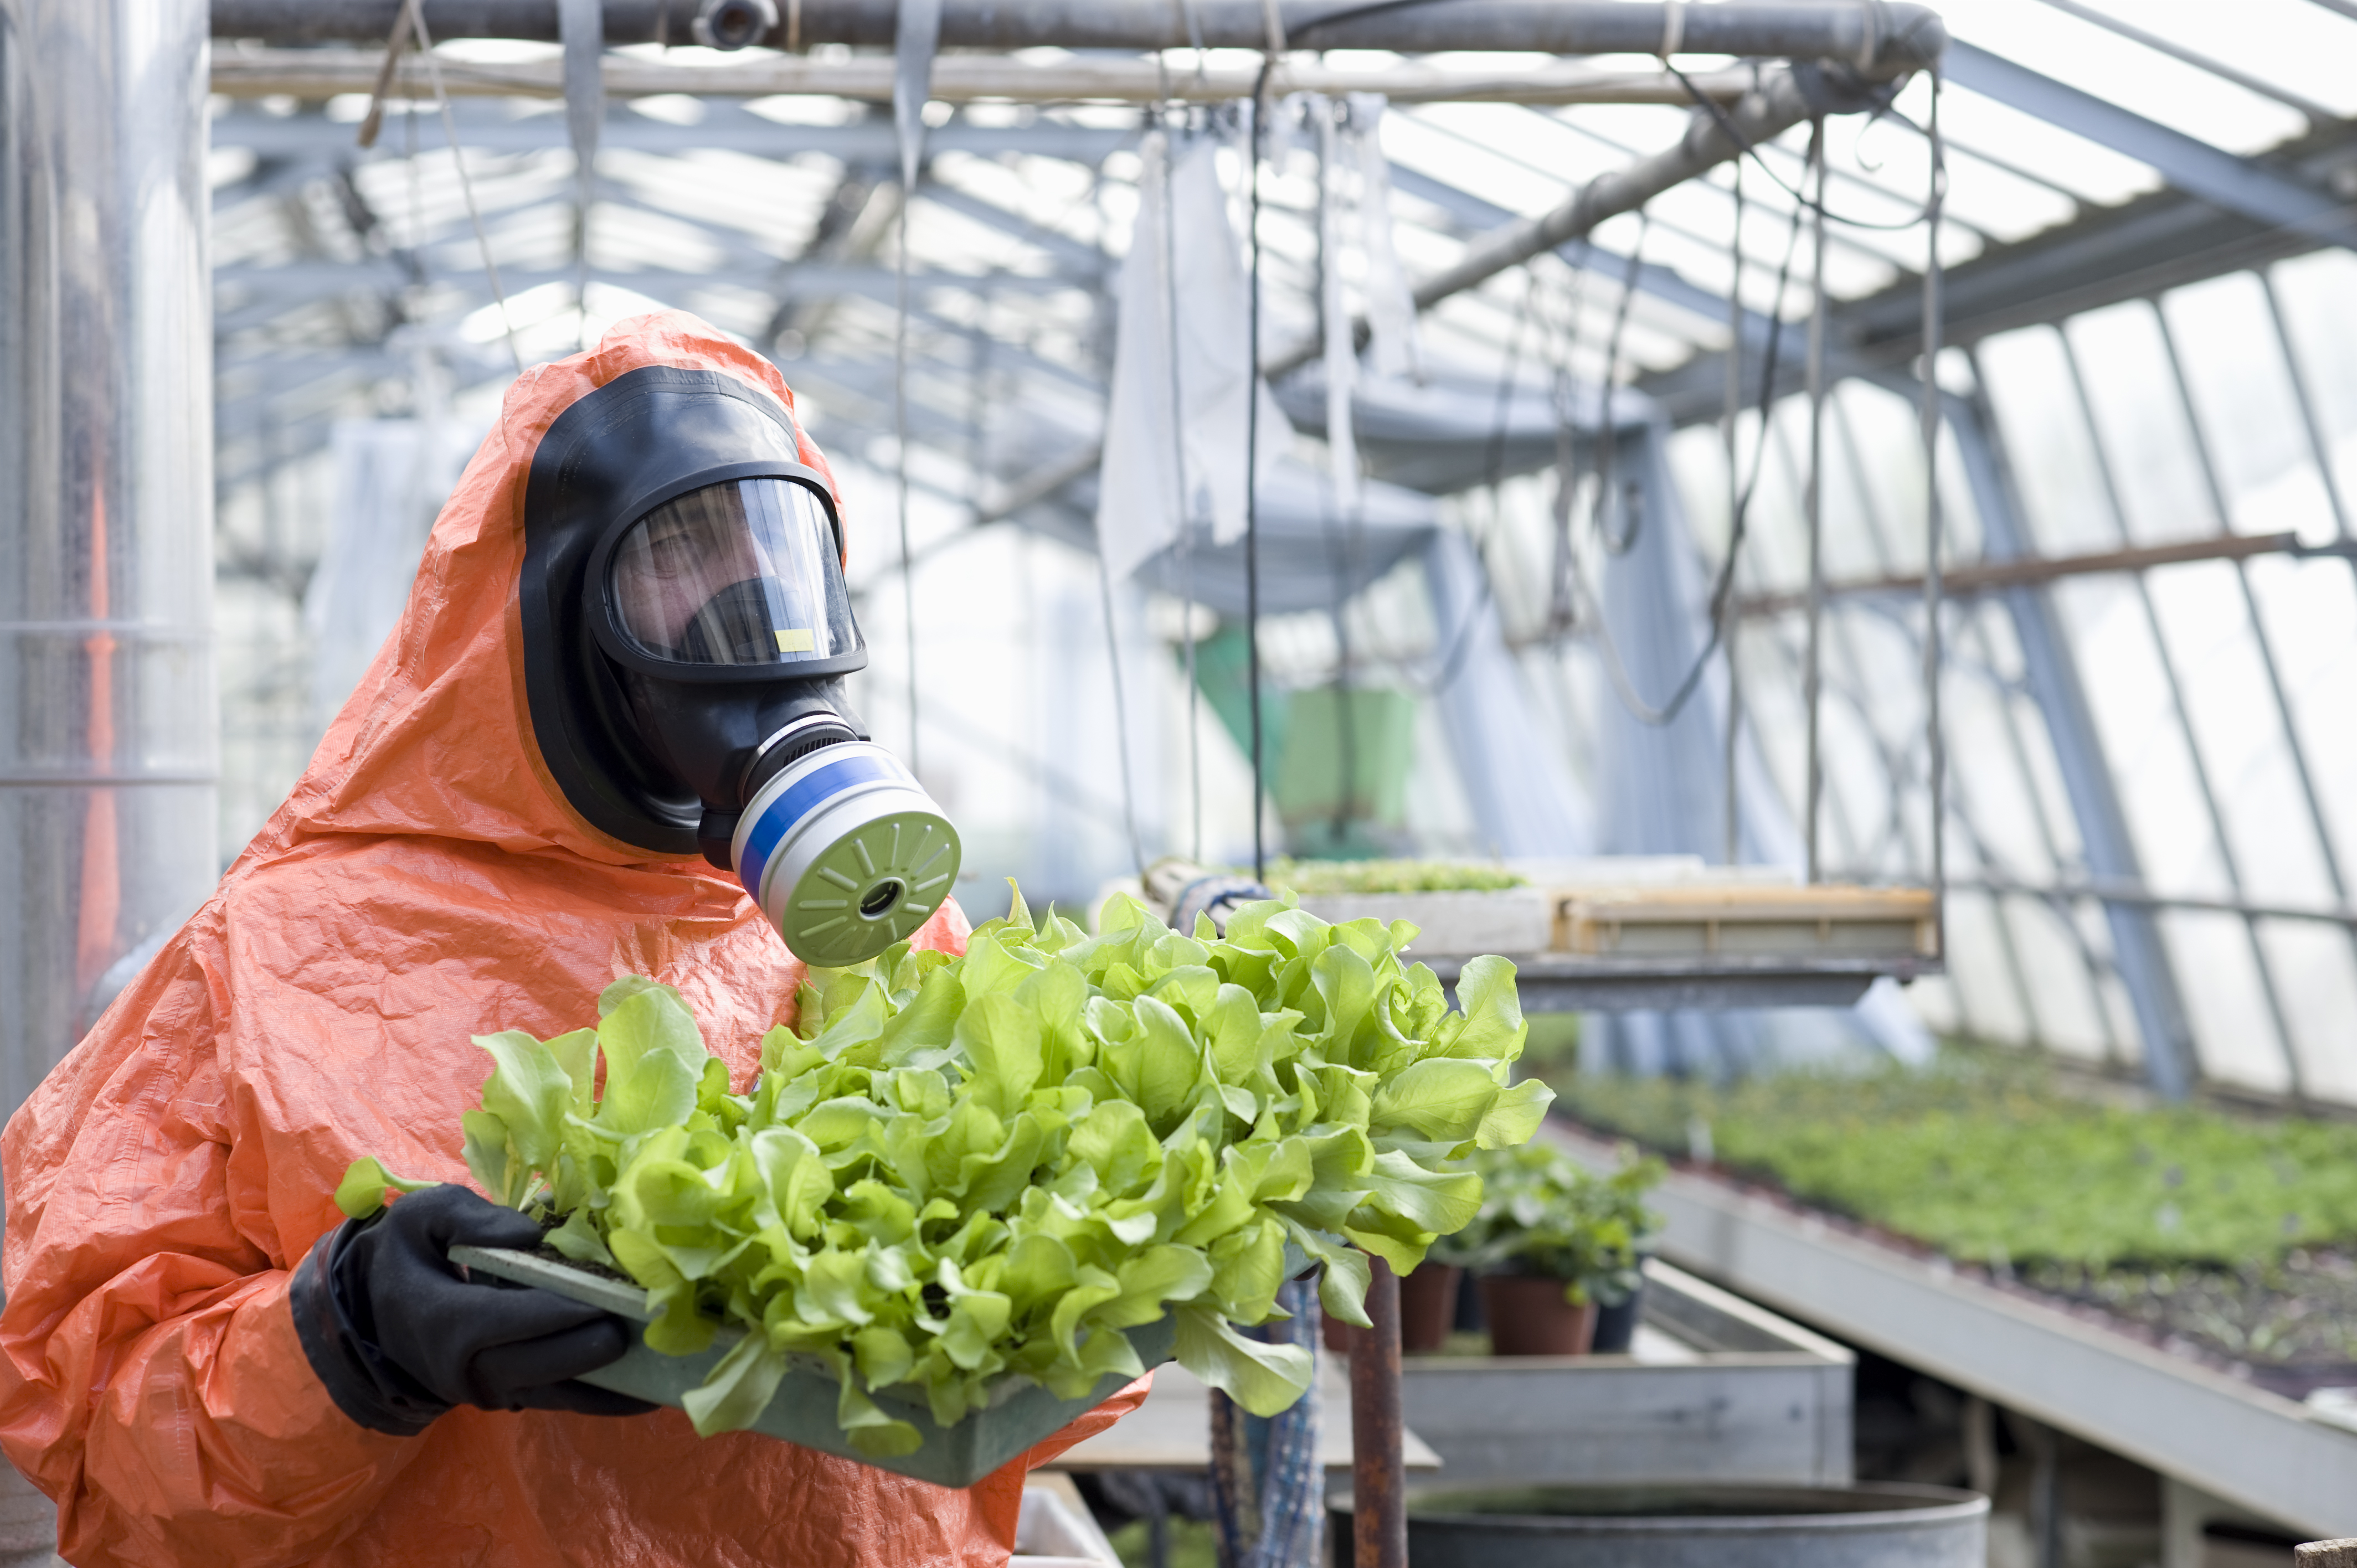 A person in a hazmat suit with a gas mask holds a tray of lettuce in a greenhouse, illustrating the idea that E. coli bacteria like the type that can be found in some types of vegetables can be deadly to humans.